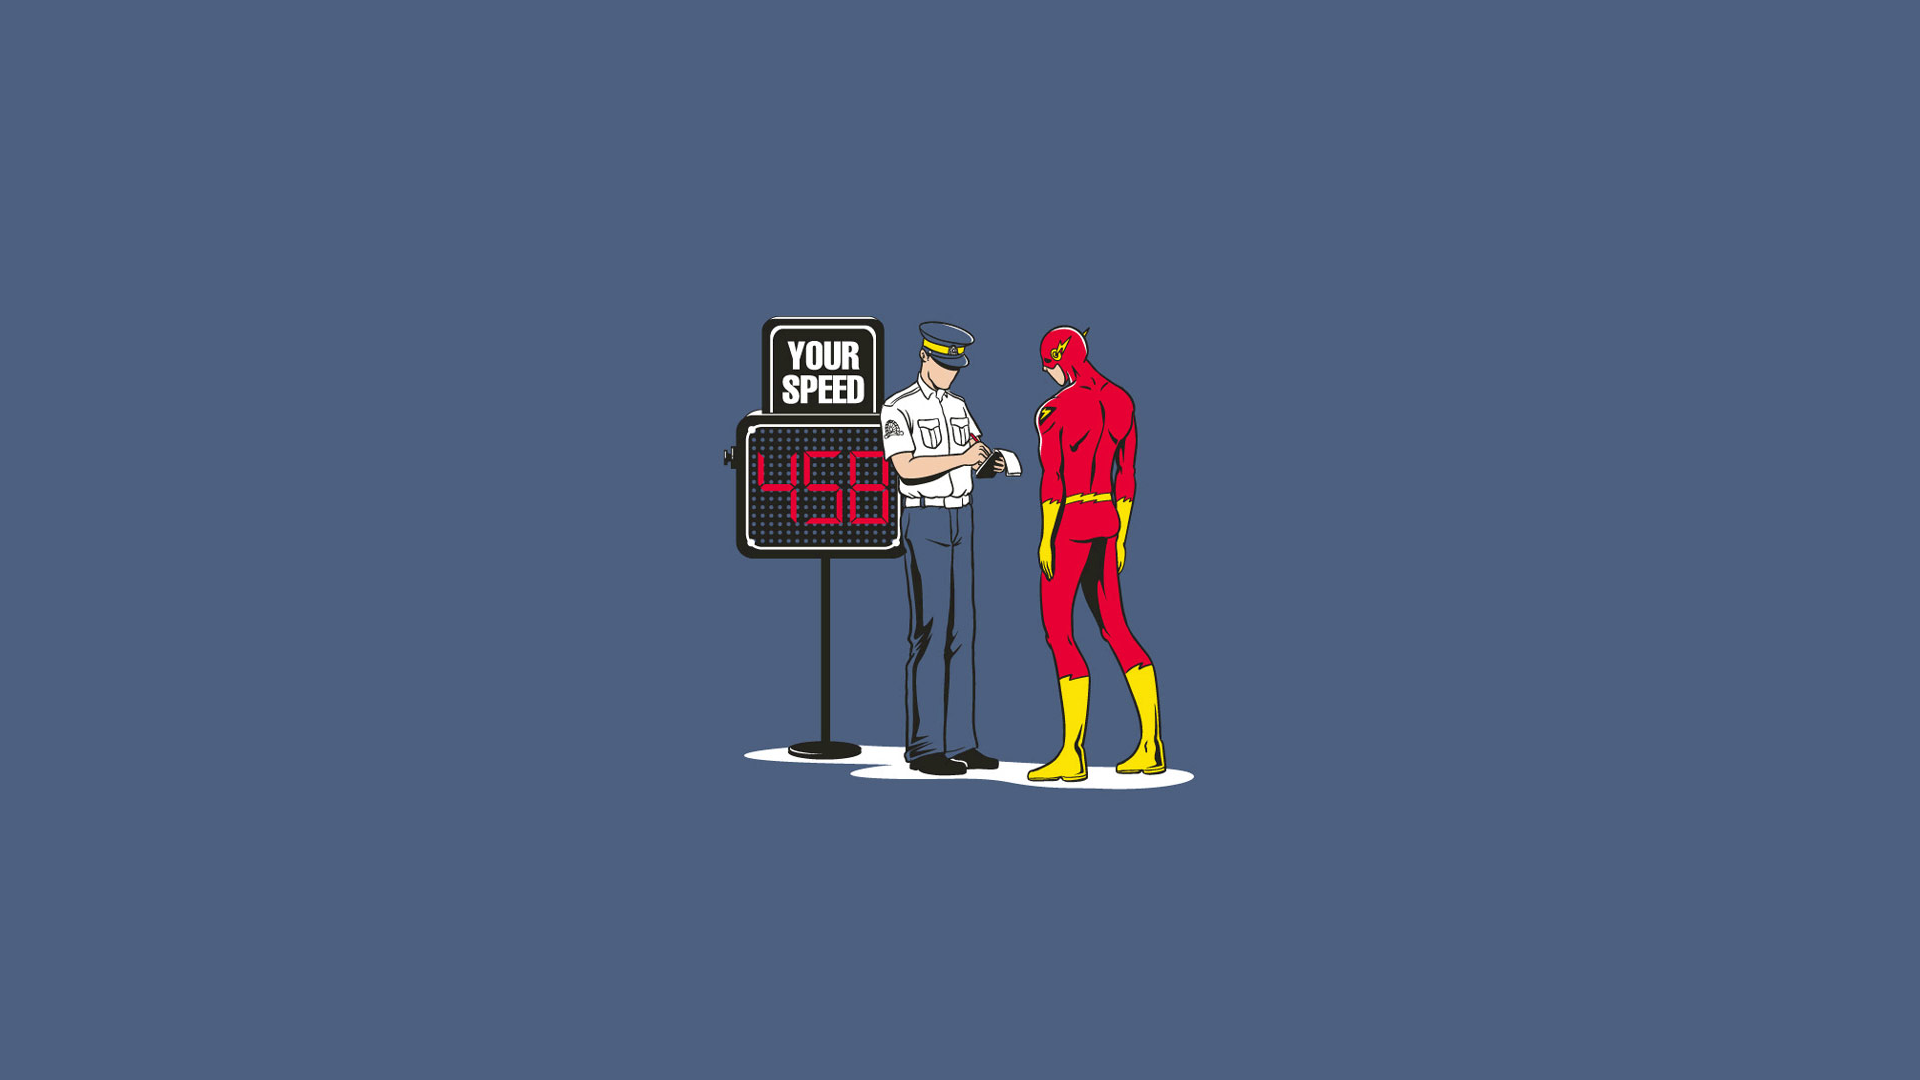 Funny Flash Wallpapers